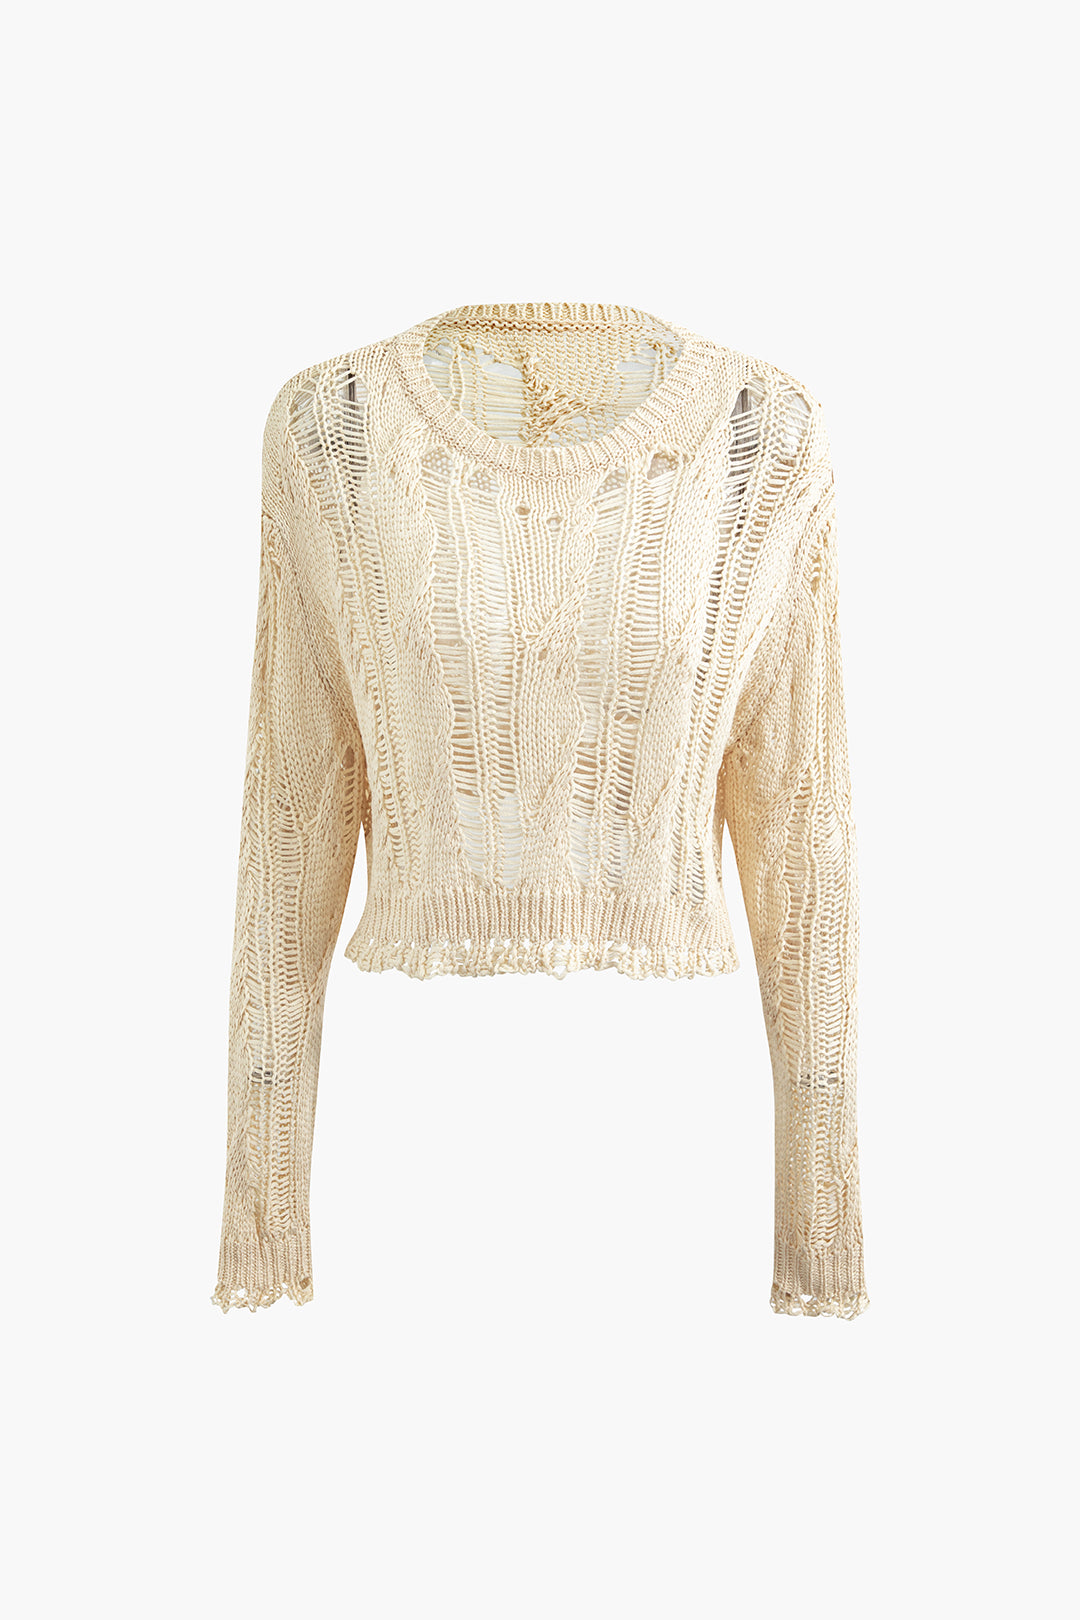 Distressed Laddered Knit Long Sleeve Crop Cover-Up Top